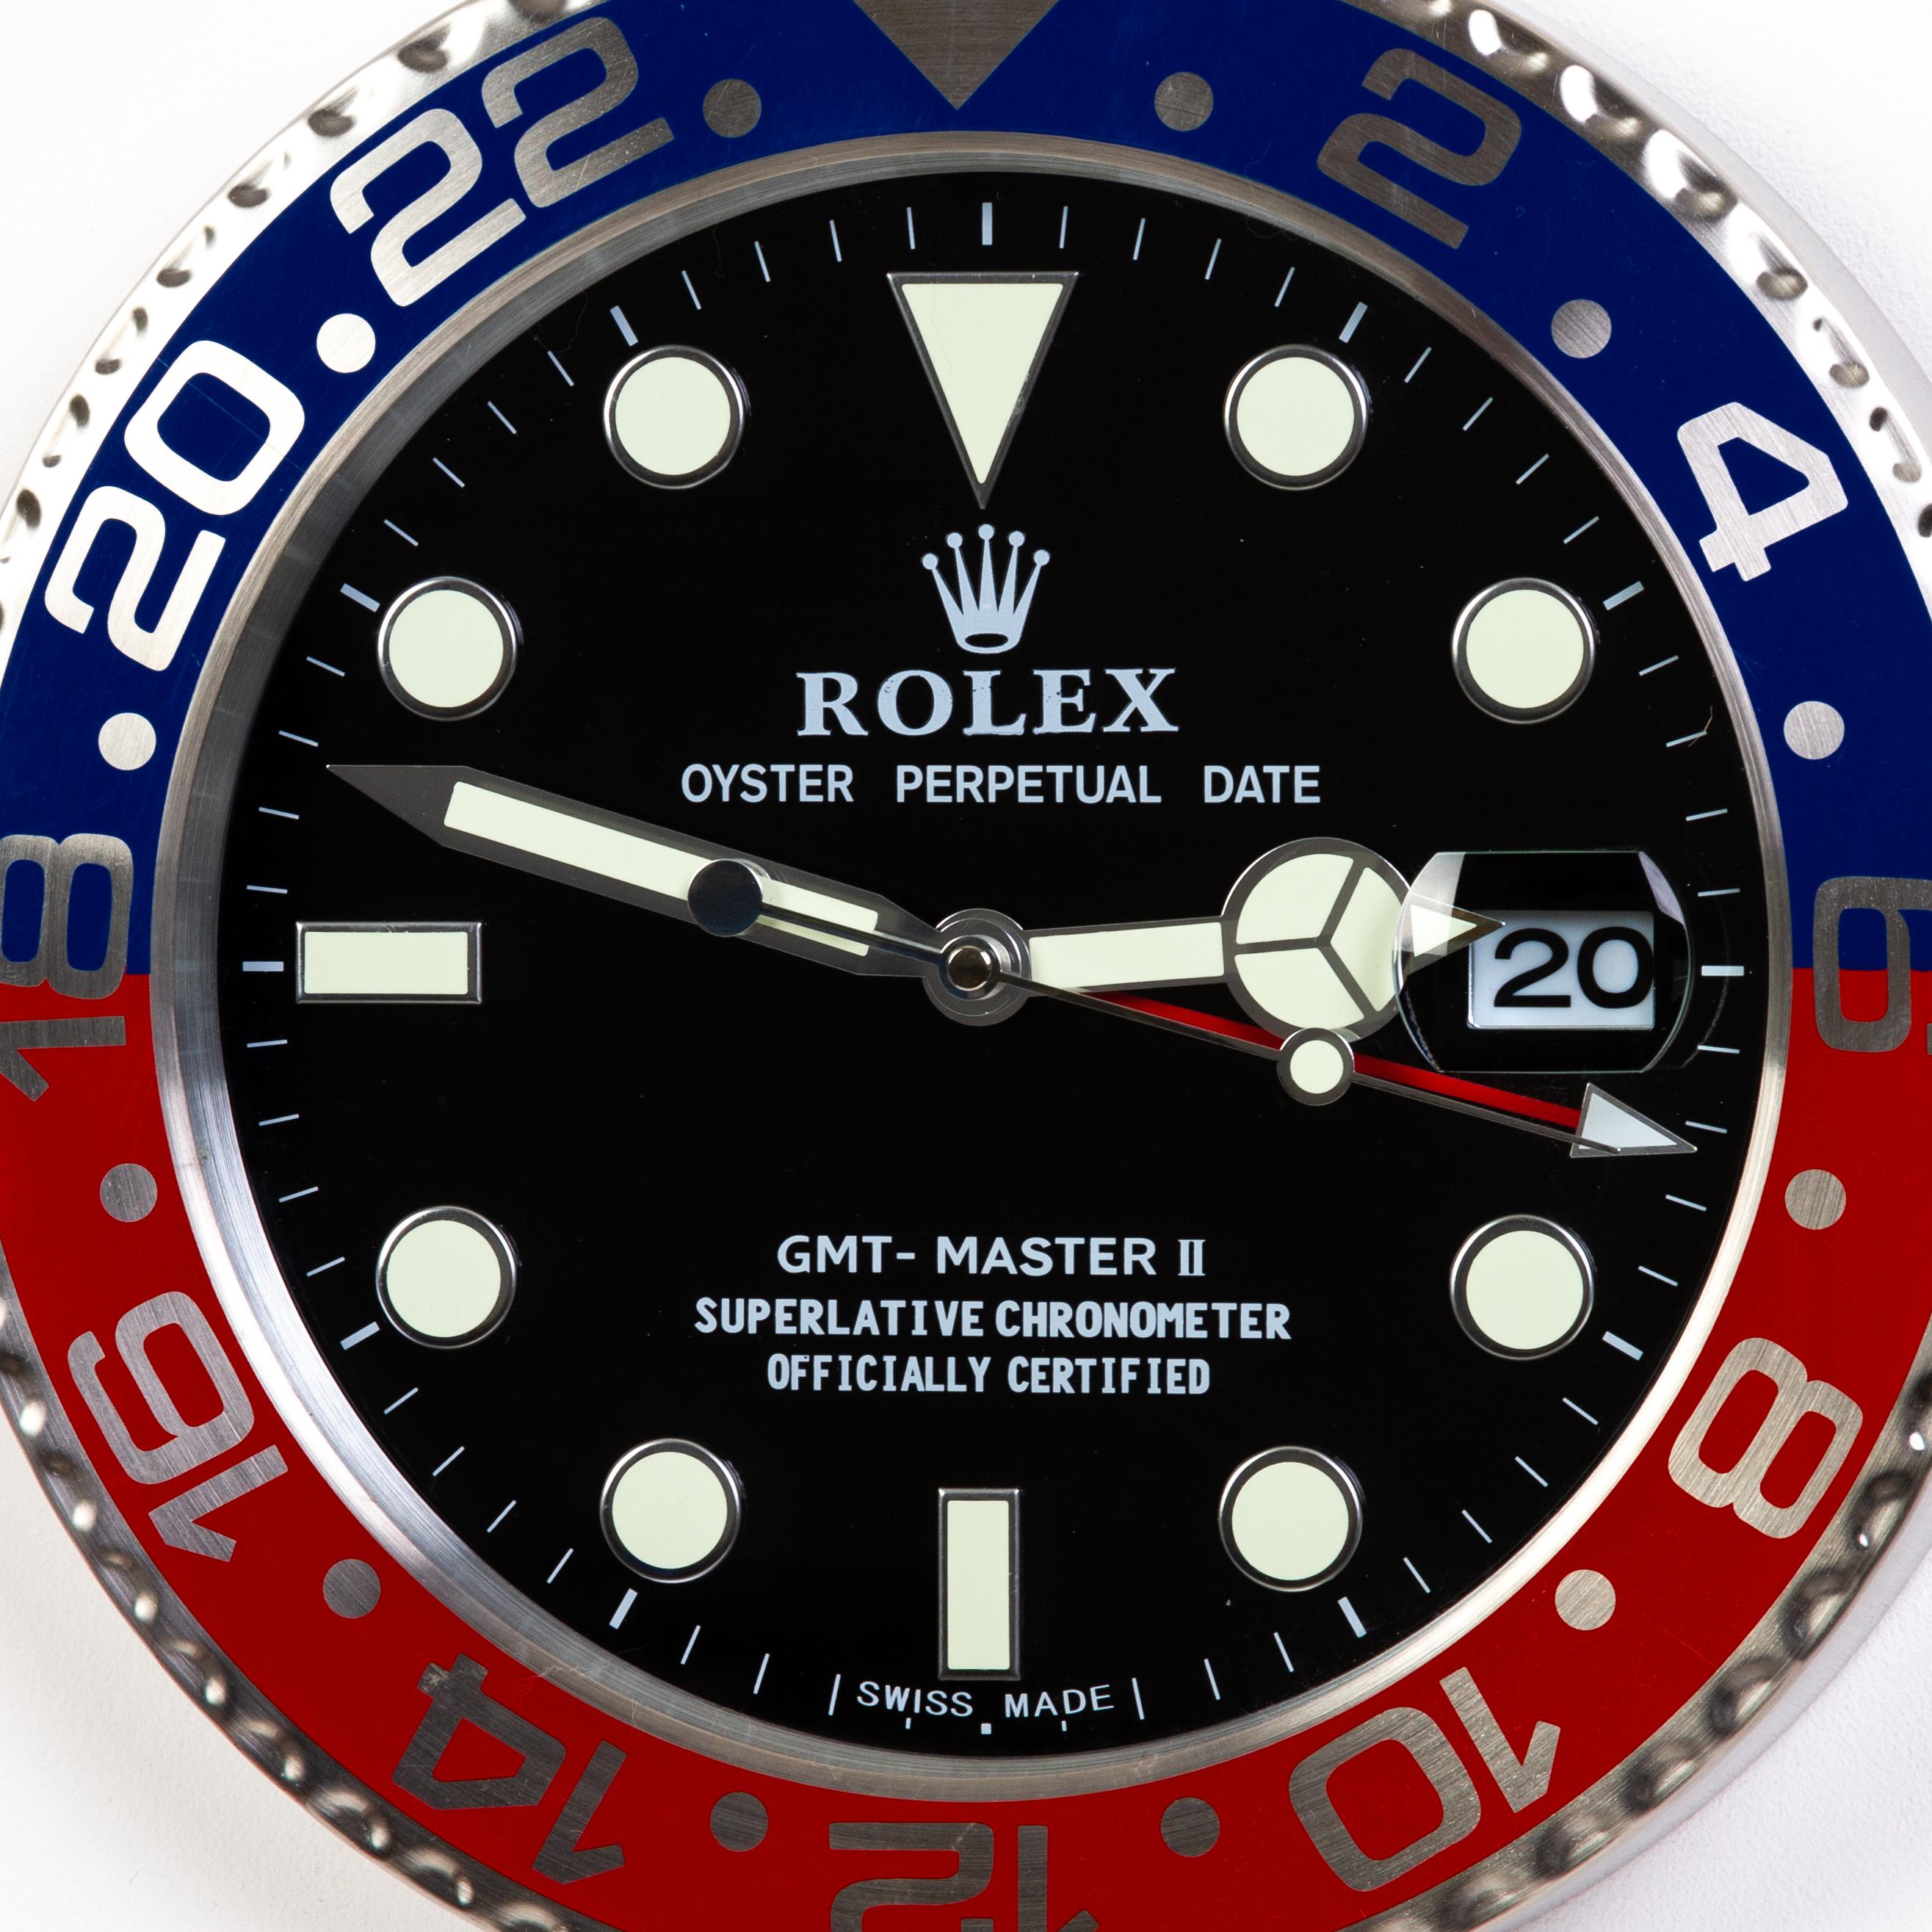 ROLEX Officially Licensed Oyster Perpetual Pepsi GMT Master II Wall Clock 
Good condition, working.
Free international shipping.